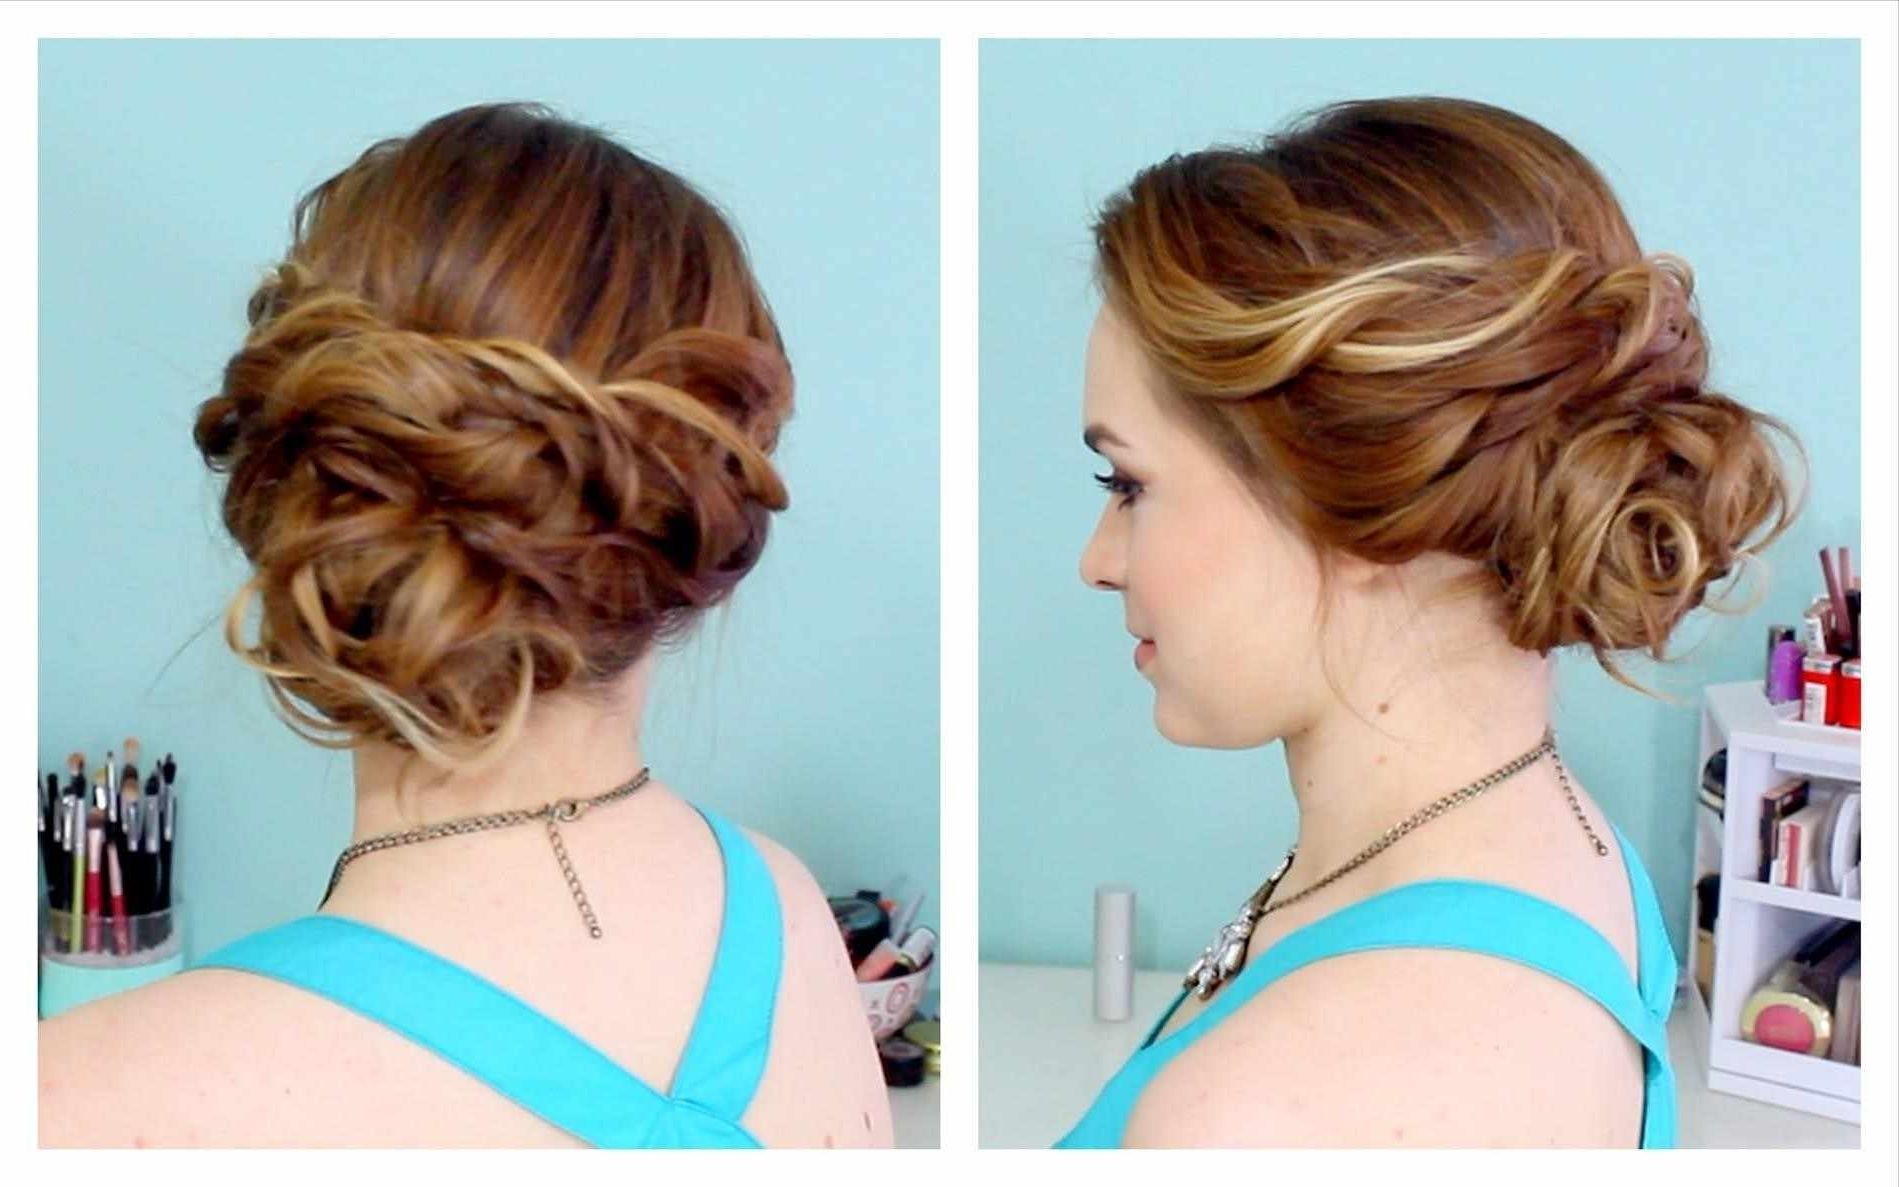 Amusing Loose Buns Hairstyles About Indian Low Bun Hairstyles Loose For Low Bun Updo Hairstyles (View 9 of 15)